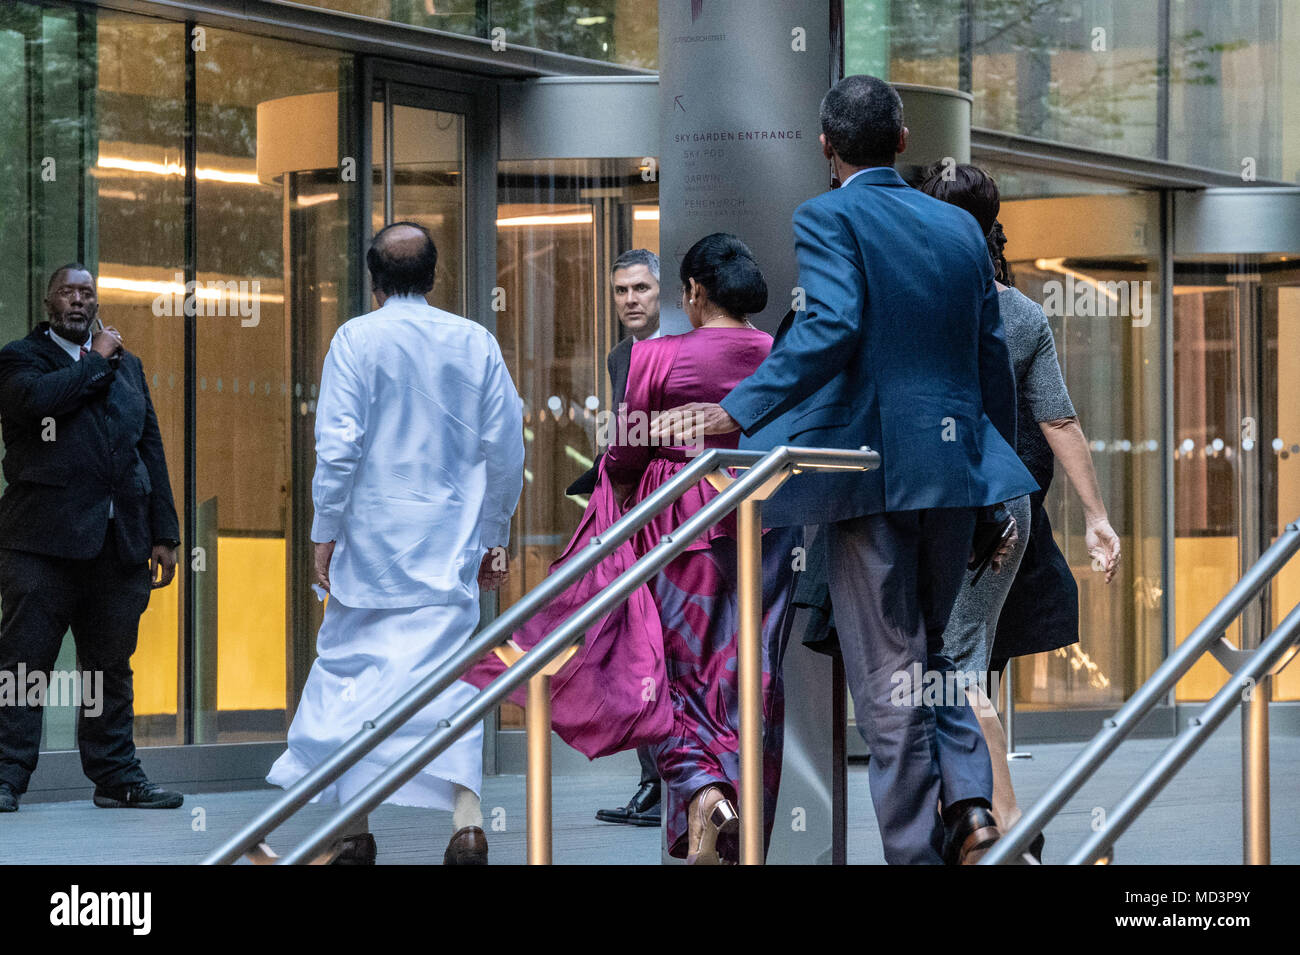 London, UK. 18th April 2018, Amid tight security Commonwealth Heads of State arrive by coach at a dinner and reception hosted by Prime Minister Theresa May, at the Walkie Talkie Building (20 Fenchurch Street) in the City of London Credit: Ian Davidson/Alamy Live News Stock Photo